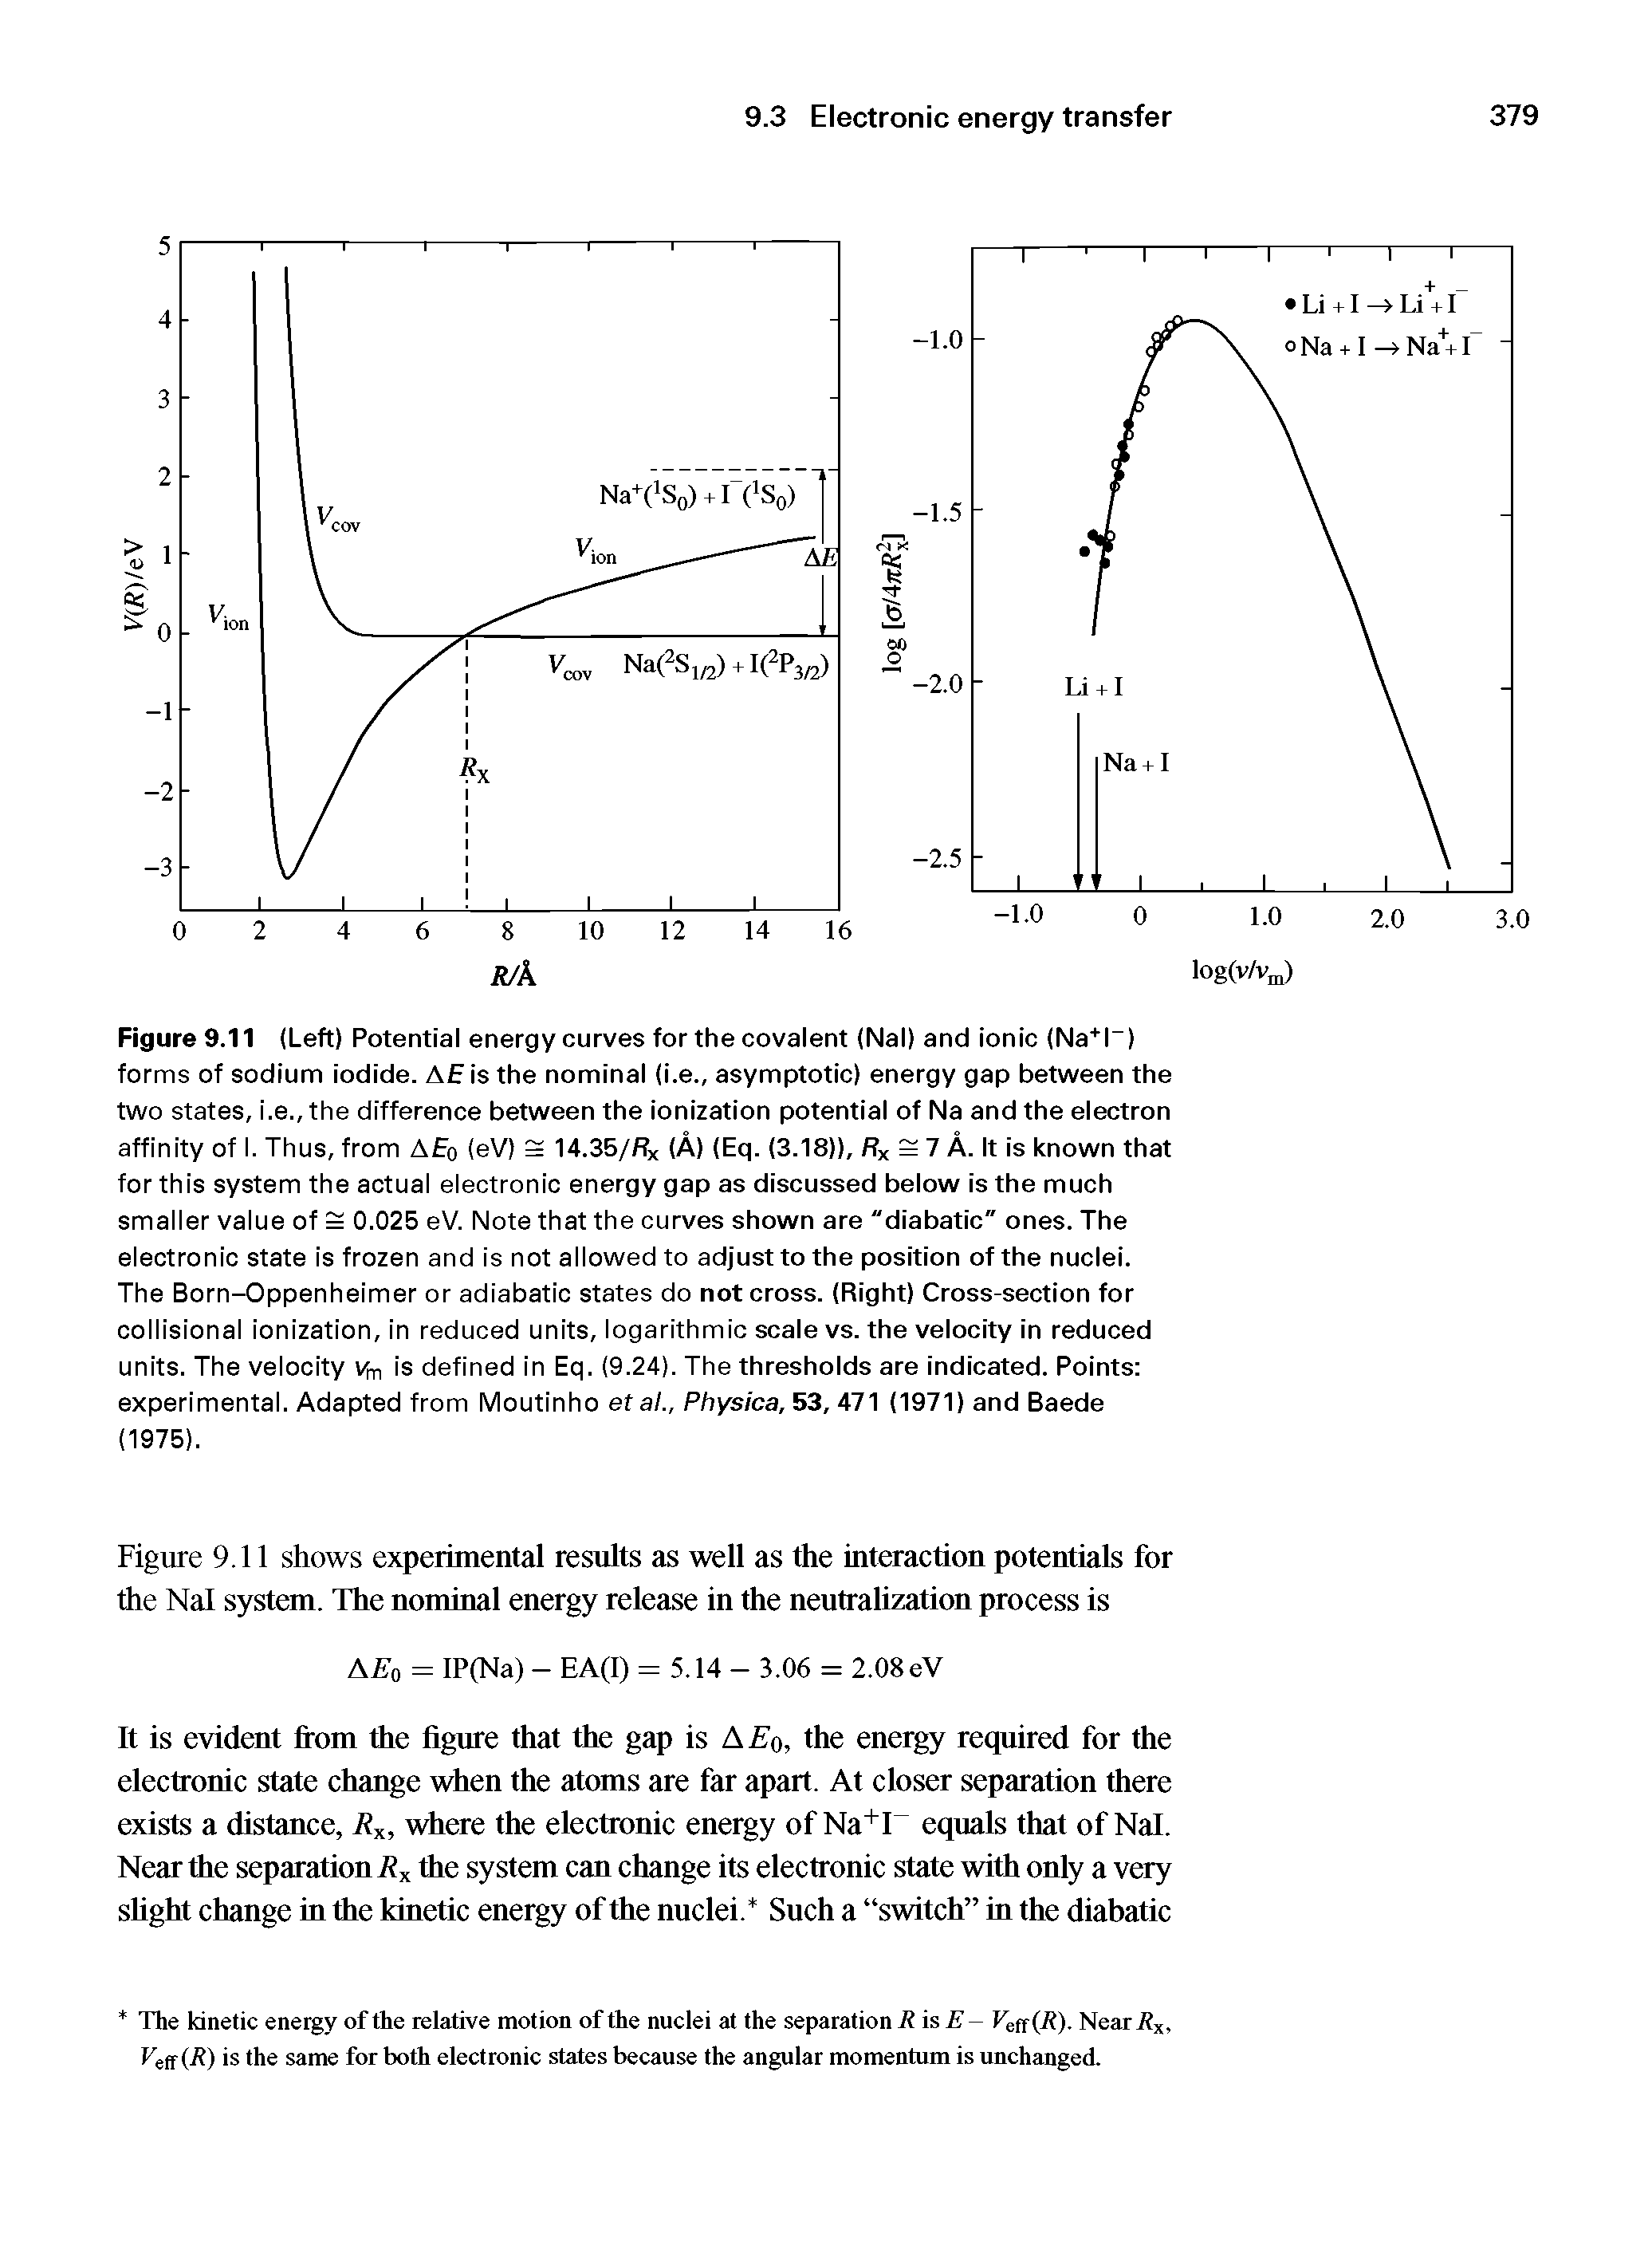 Figure 9.11 (Left) Potential energy curves for the covalent (Nal) and ionic (Na l ) forms of sodium iodide. AE is the nominal (i.e., asymptotic) energy gap between the two states, i.e., the difference between the ionization potential of Na and the electron affinity of I. Thus, from A o (eV) S 14.35// x (A) (Eq. (3.18)), / x = 7 A. It is known that for this system the actual electronic energy gap as discussed below is the much smaller value of = 0.025 eV. Note that the curves shown are "diabatic" ones. The electronic state is frozen and is not allowed to adjust to the position of the nuclei. The Born-Oppenheimer or adiabatic states do not cross. (Right) Cross-section for collisional ionization, in reduced units, logarithmic scale vs. the velocity in reduced units. The velocity Vm is defined in Eq. (9.24). The thresholds are indicated. Points experimental. Adapted from Moutinho etal., Physica, 53, 471 (1971) and Baede (1975).